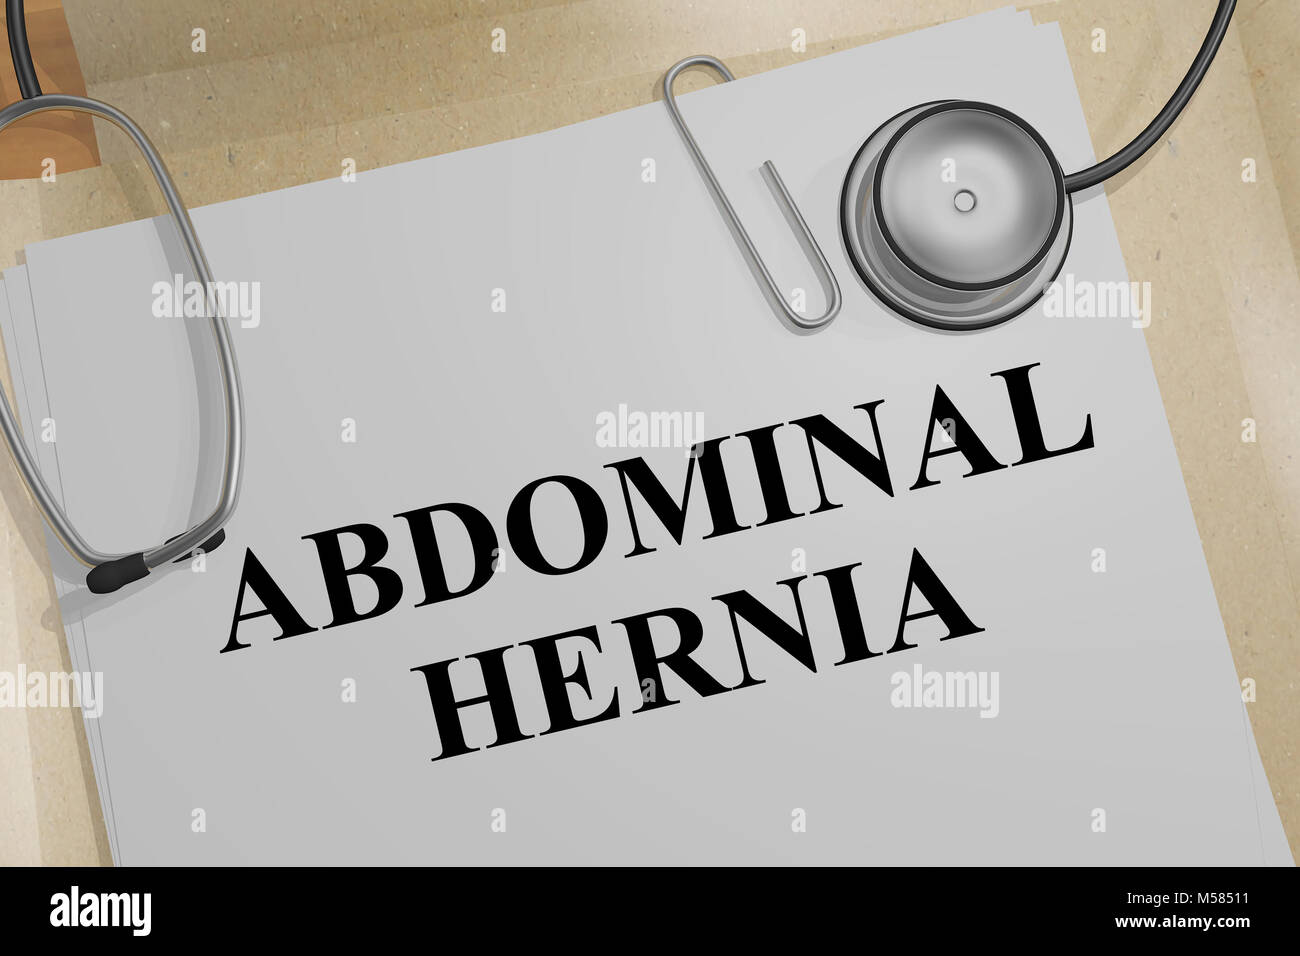 3D illustration of ABDOMINAL HERNIA title on a medical document Stock Photo